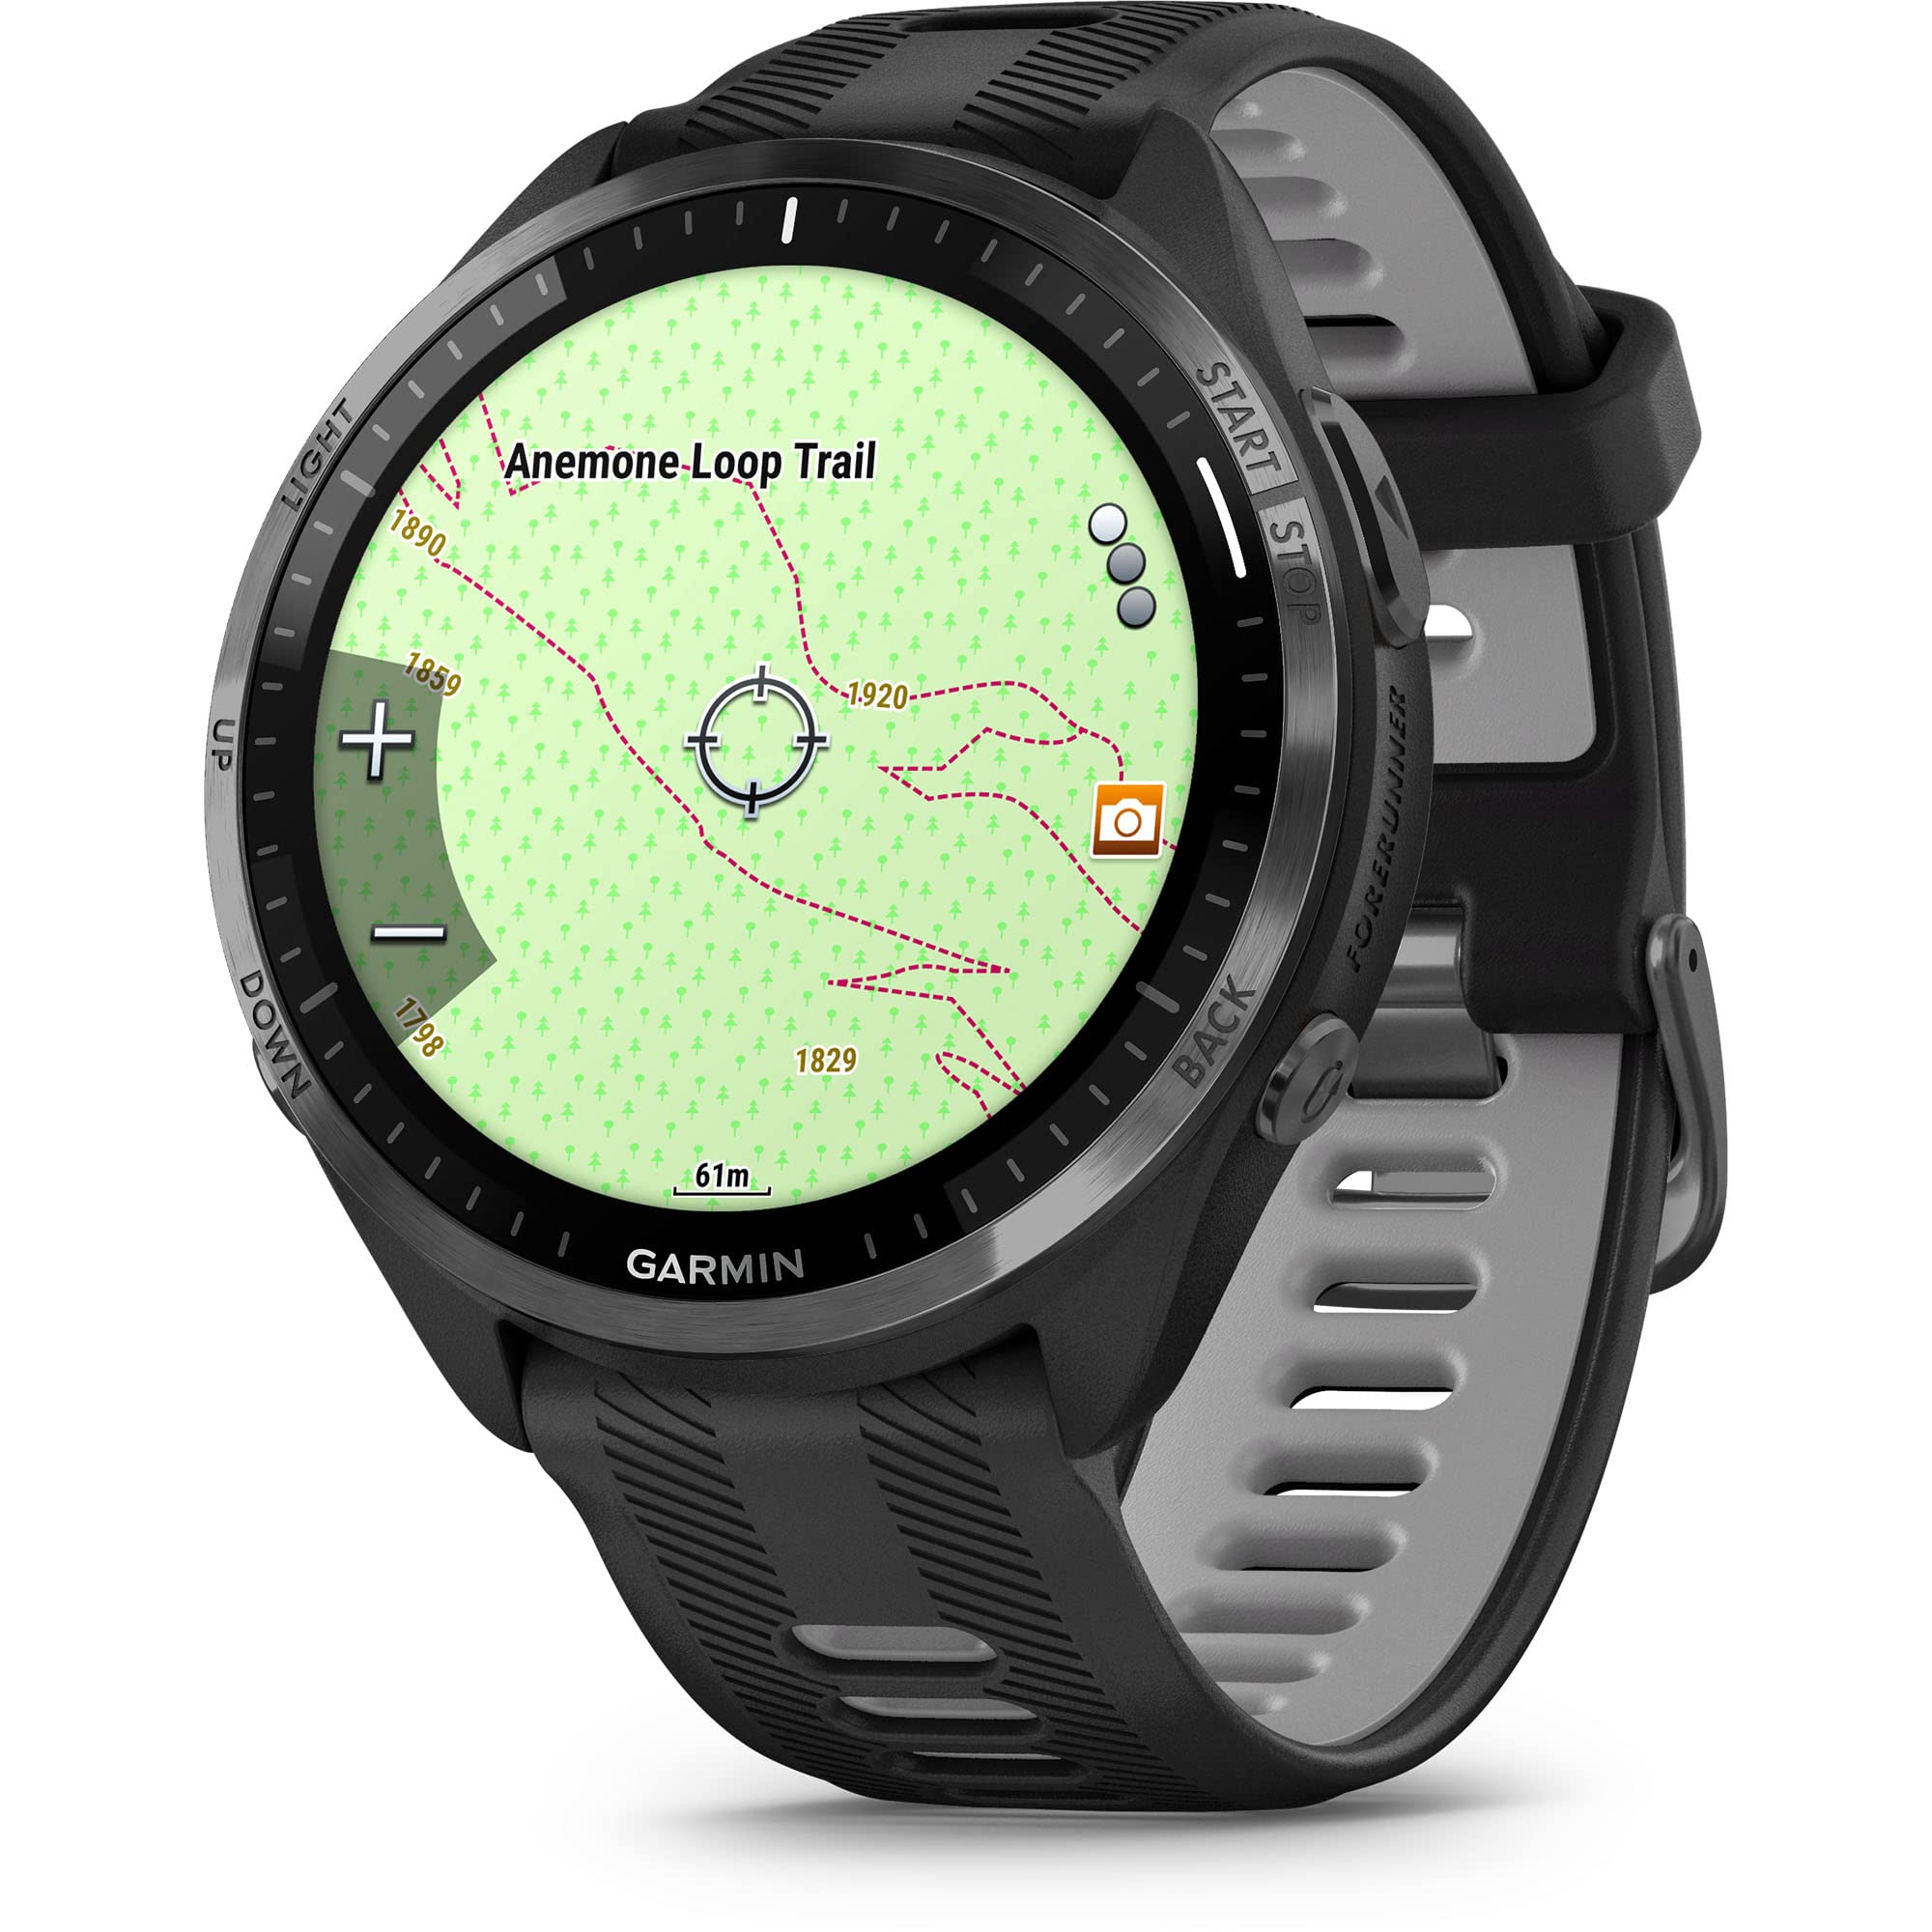 Garmin Forerunner® 965 Running Smartwatch, Colorful AMOLED Display, Training Metrics and Recovery Insights, Black and Powder Gray - image 3 of 5